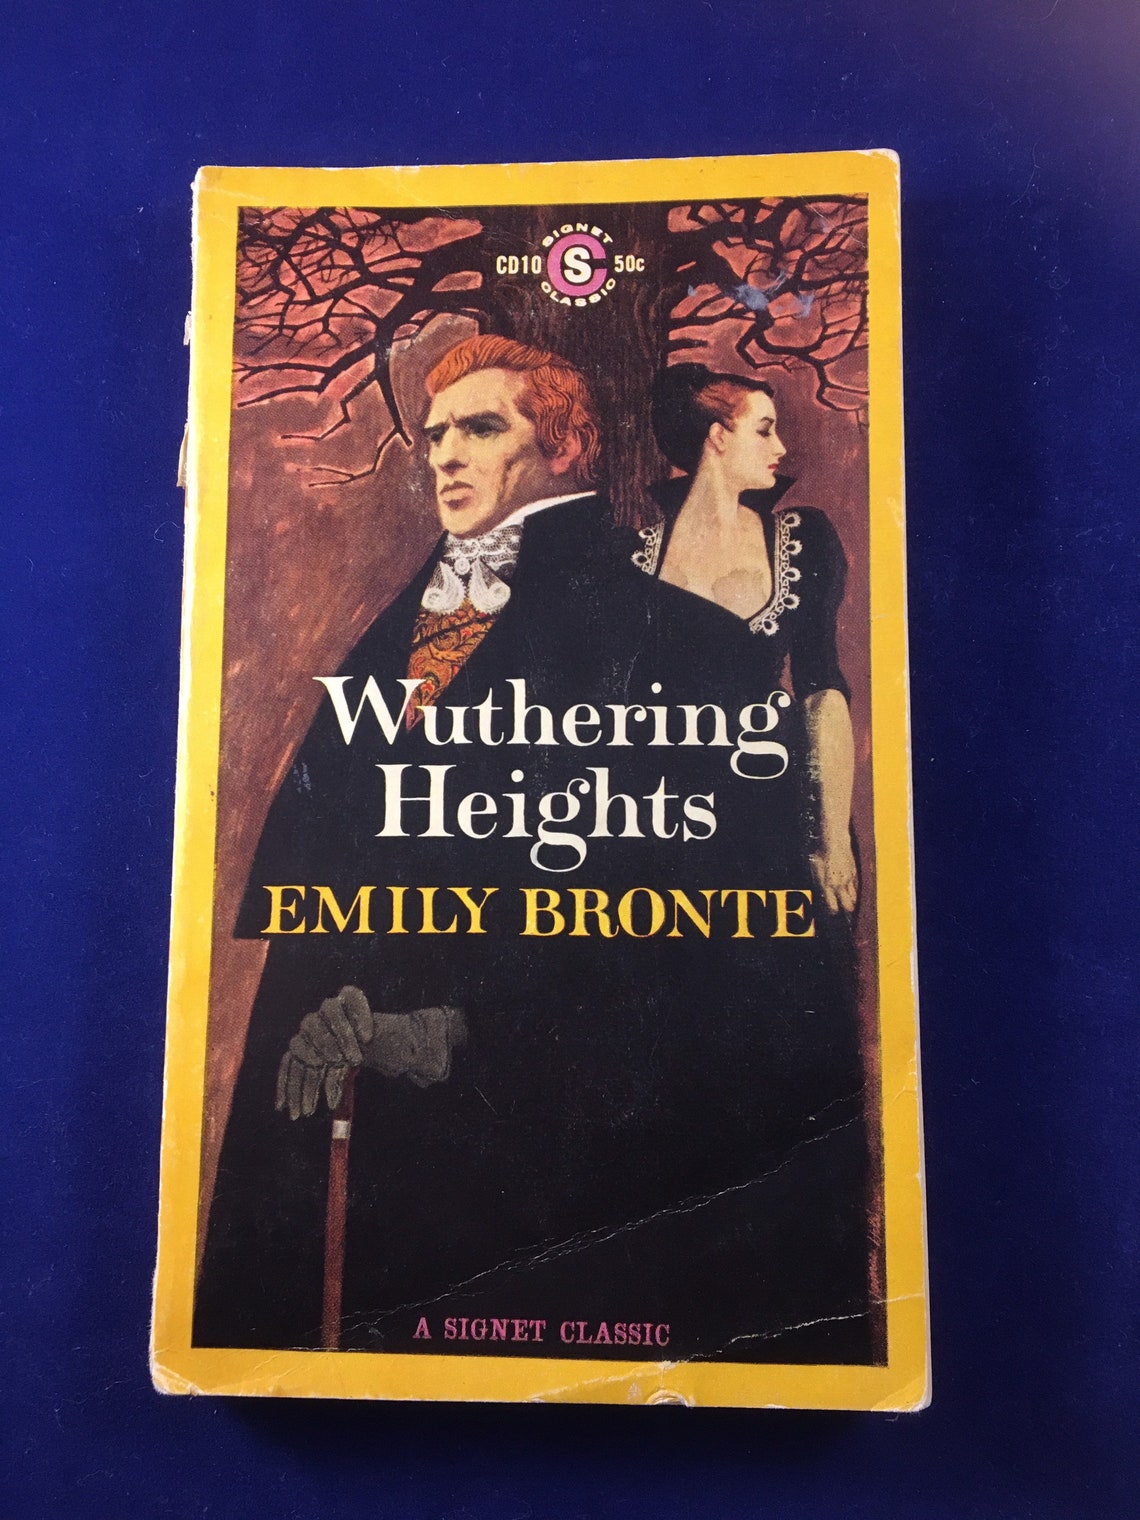 Wuthering Heights Vintage 1962 printing by Emily Bronte | Etsy